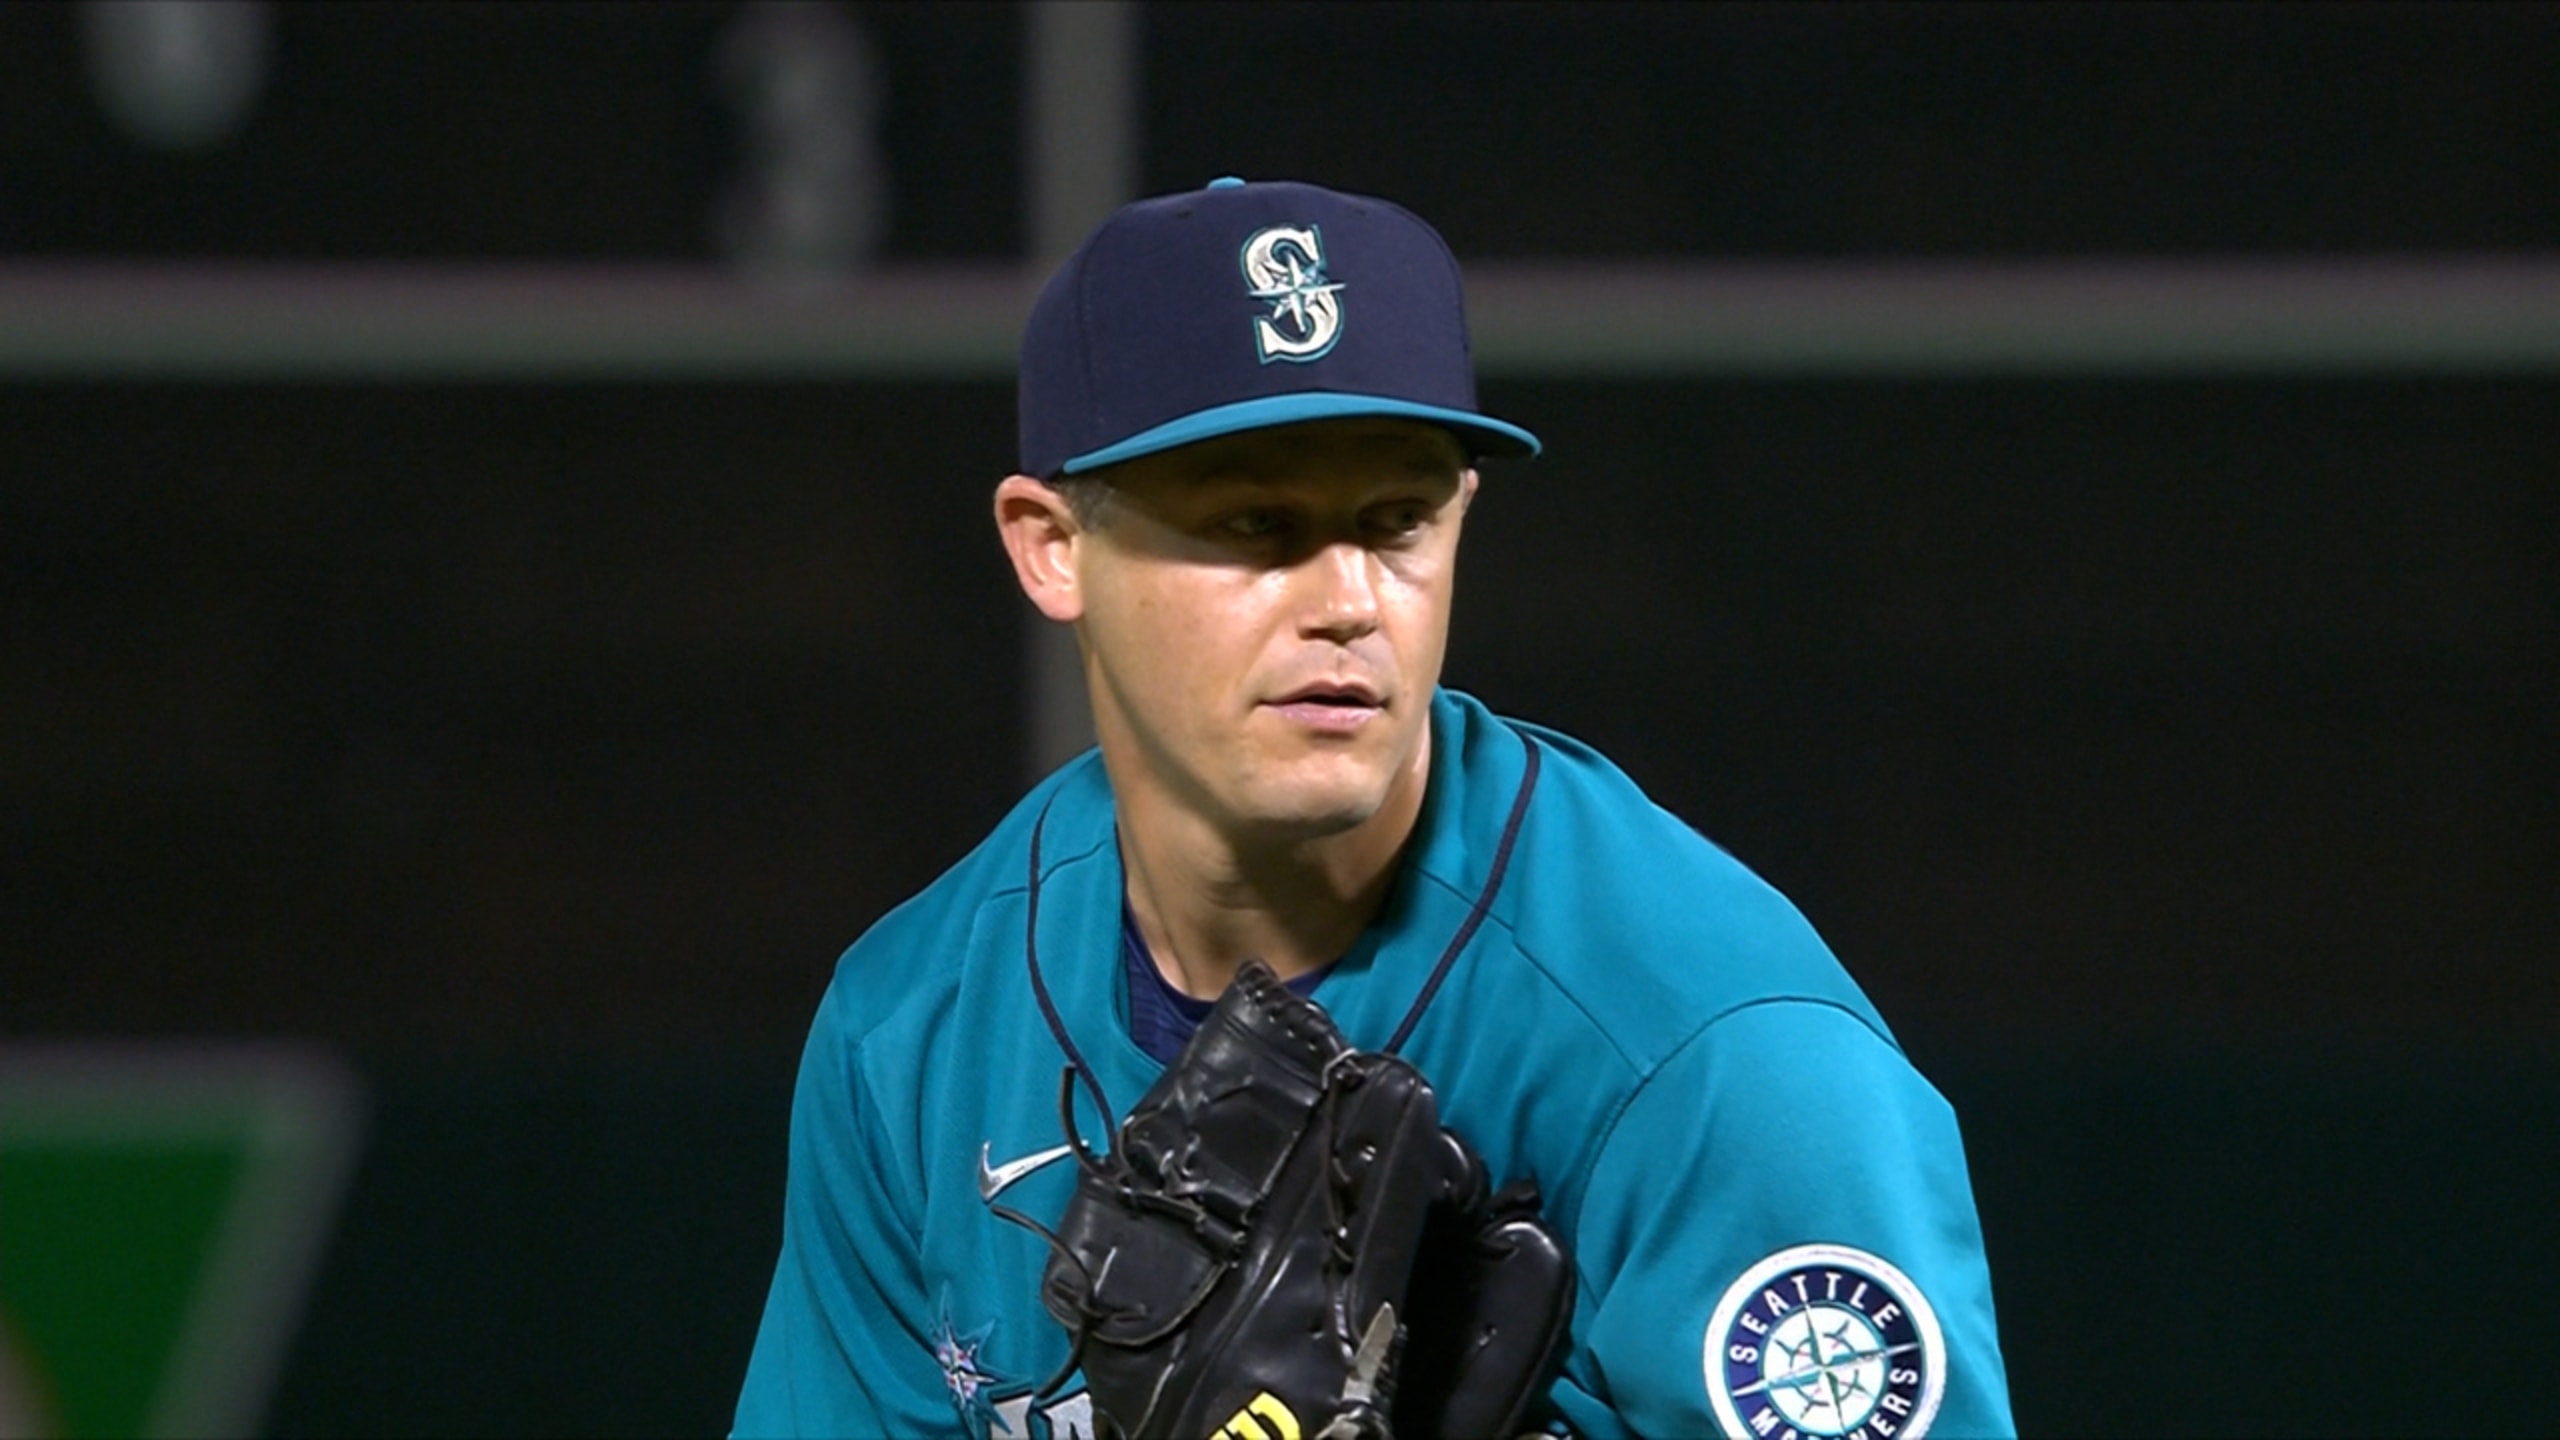 Seattle Mariners' Reliever Paul Sewald Cementing Himself in Mariners  History - Fastball